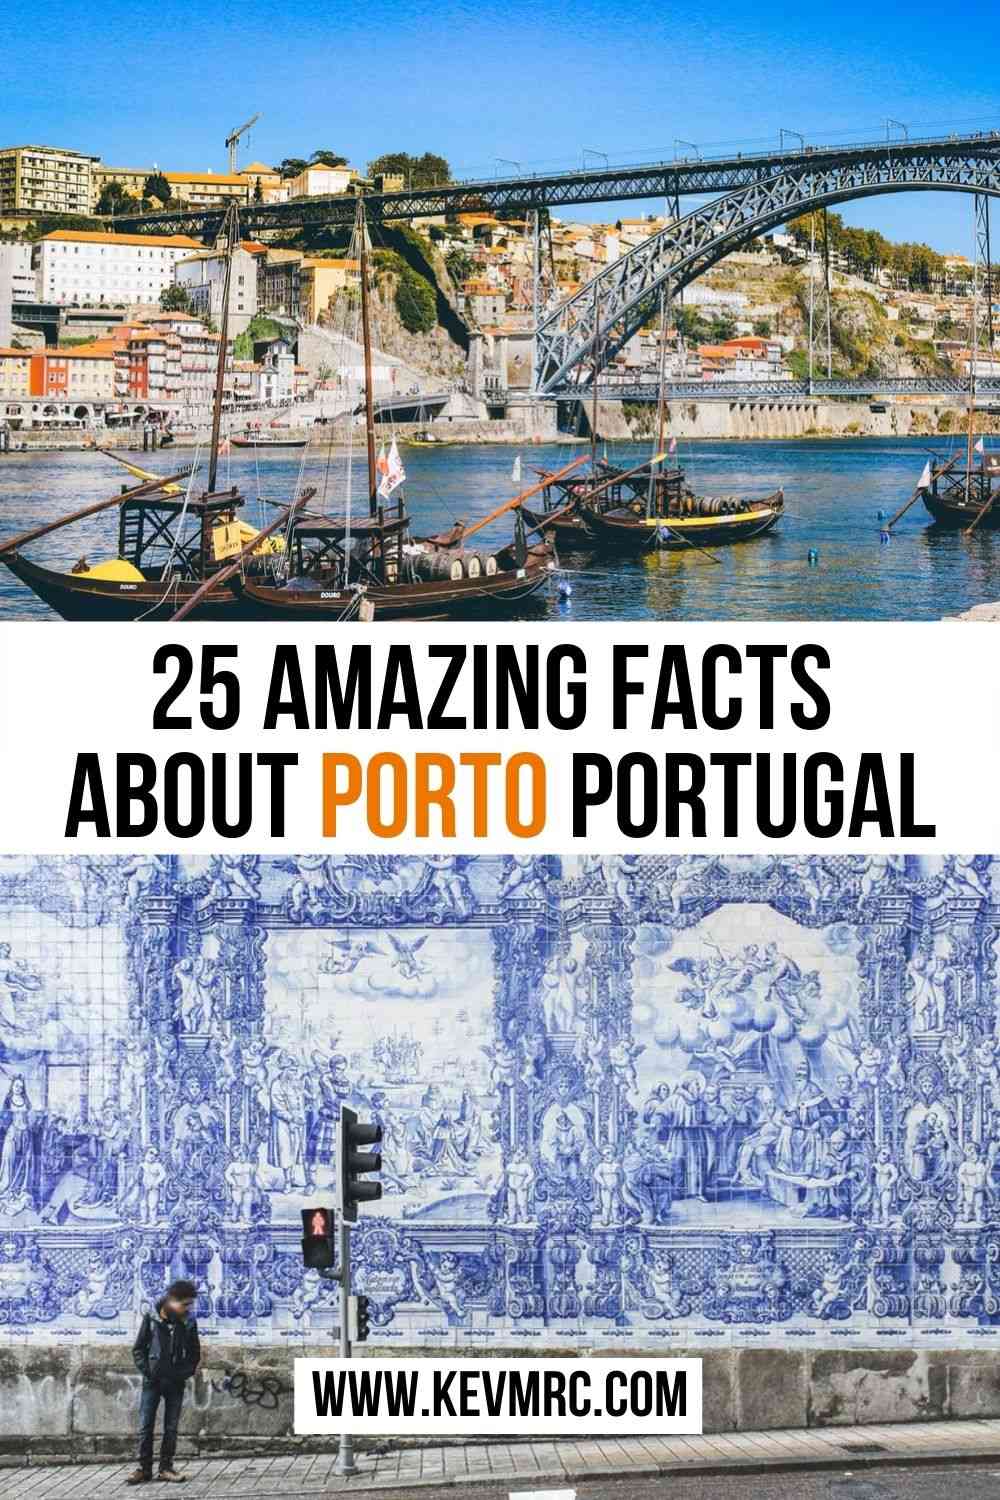 Located in the north of Portugal on the banks of the Douro River, Porto is a city with a strong identity that stands out with its colorful buildings and its azulejos, these beautiful ceramic walls. Discover more thanks to these 25 interesting facts about Porto, Portugal! #portugal #porto #funfacts